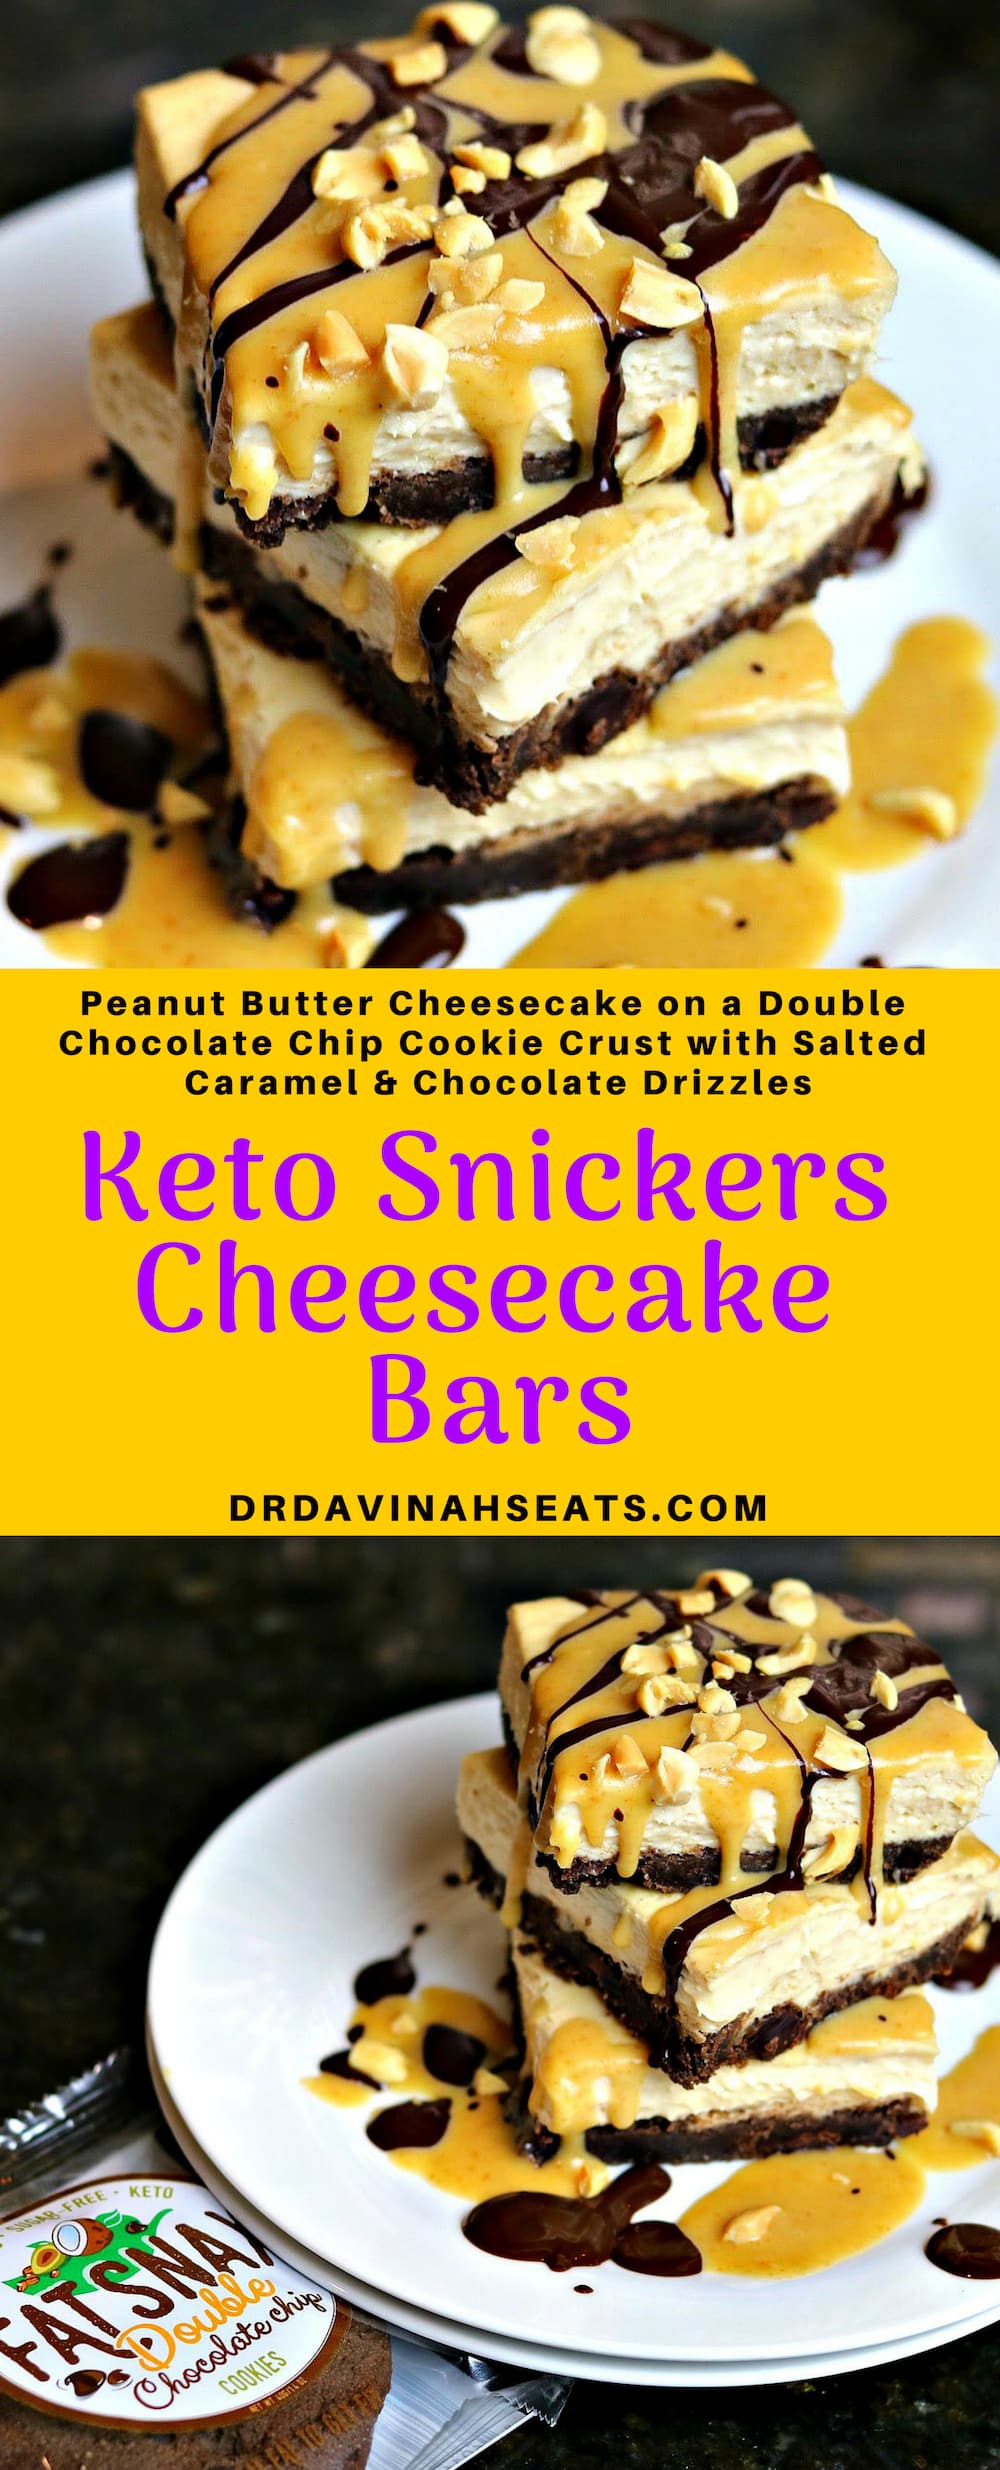 Keto Peanut Butter Cheesecake (Snickers) Bars - Dr. Davinah's Eats